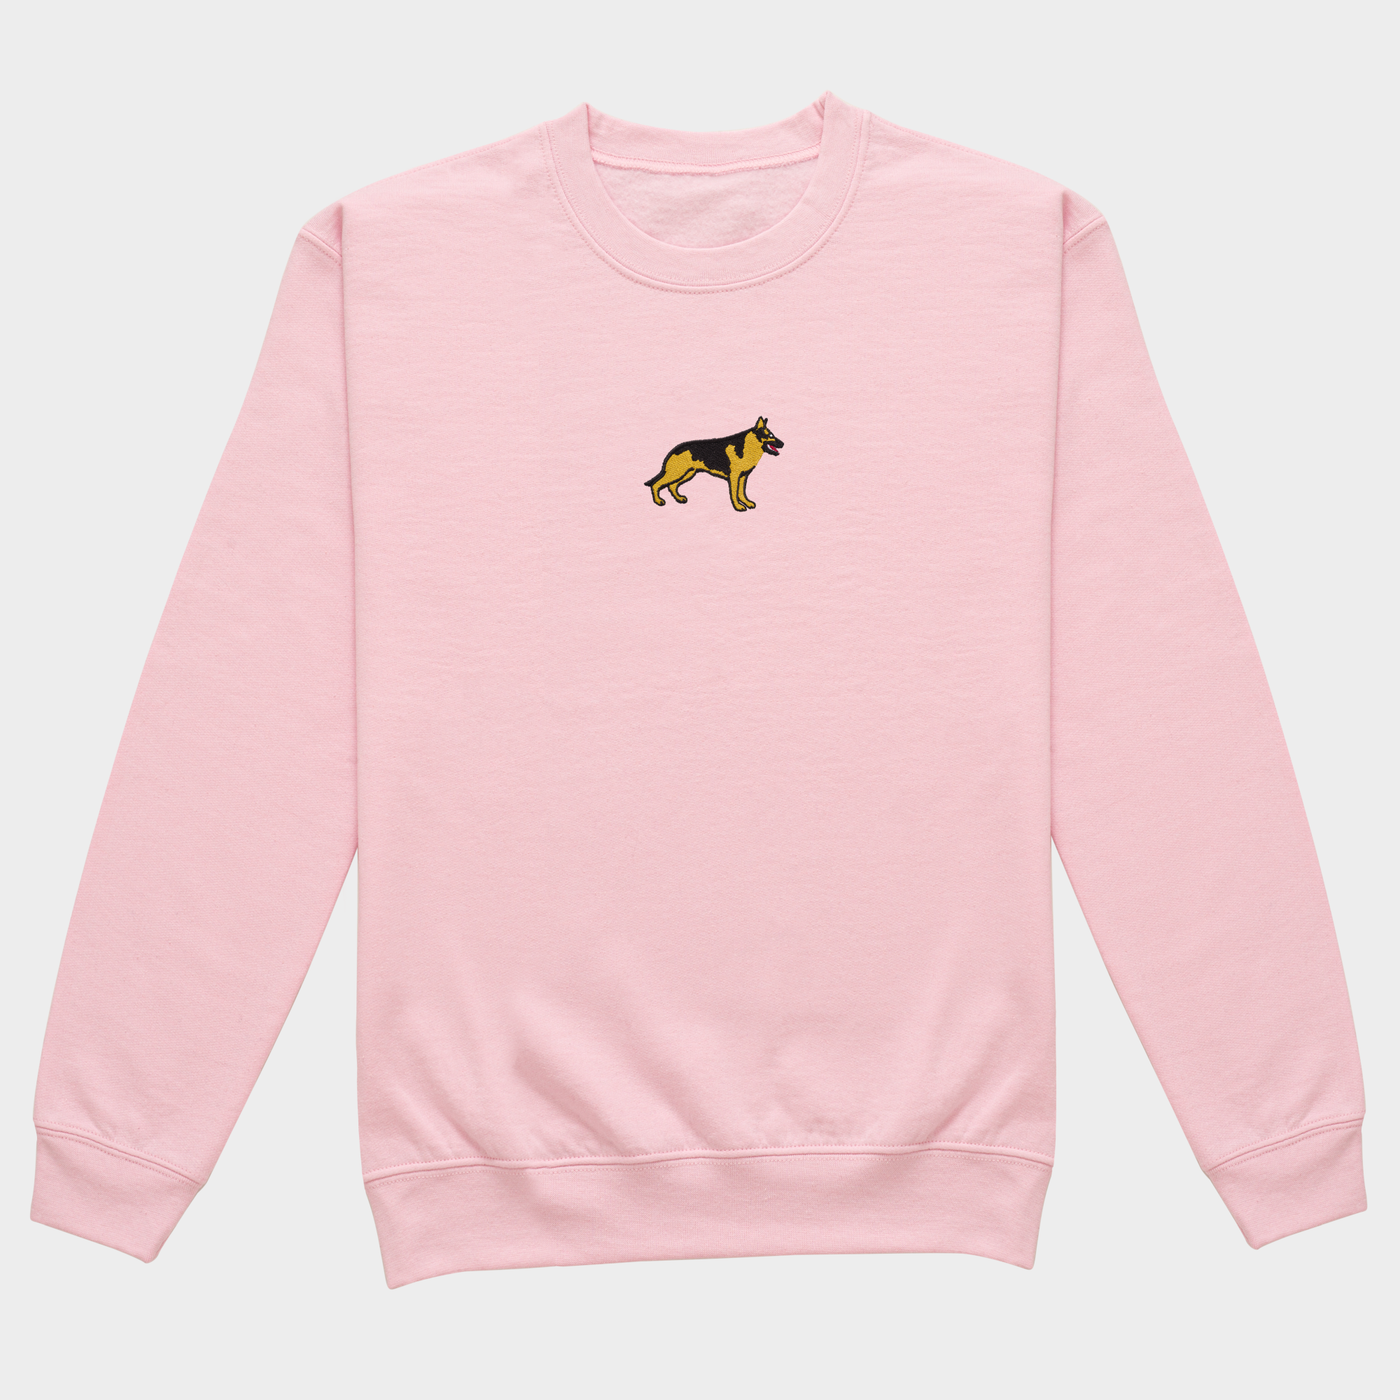 Bobby's Planet Women's Embroidered German Shepherd Sweatshirt from Paws Dog Cat Animals Collection in Light Pink Color#color_light-pink